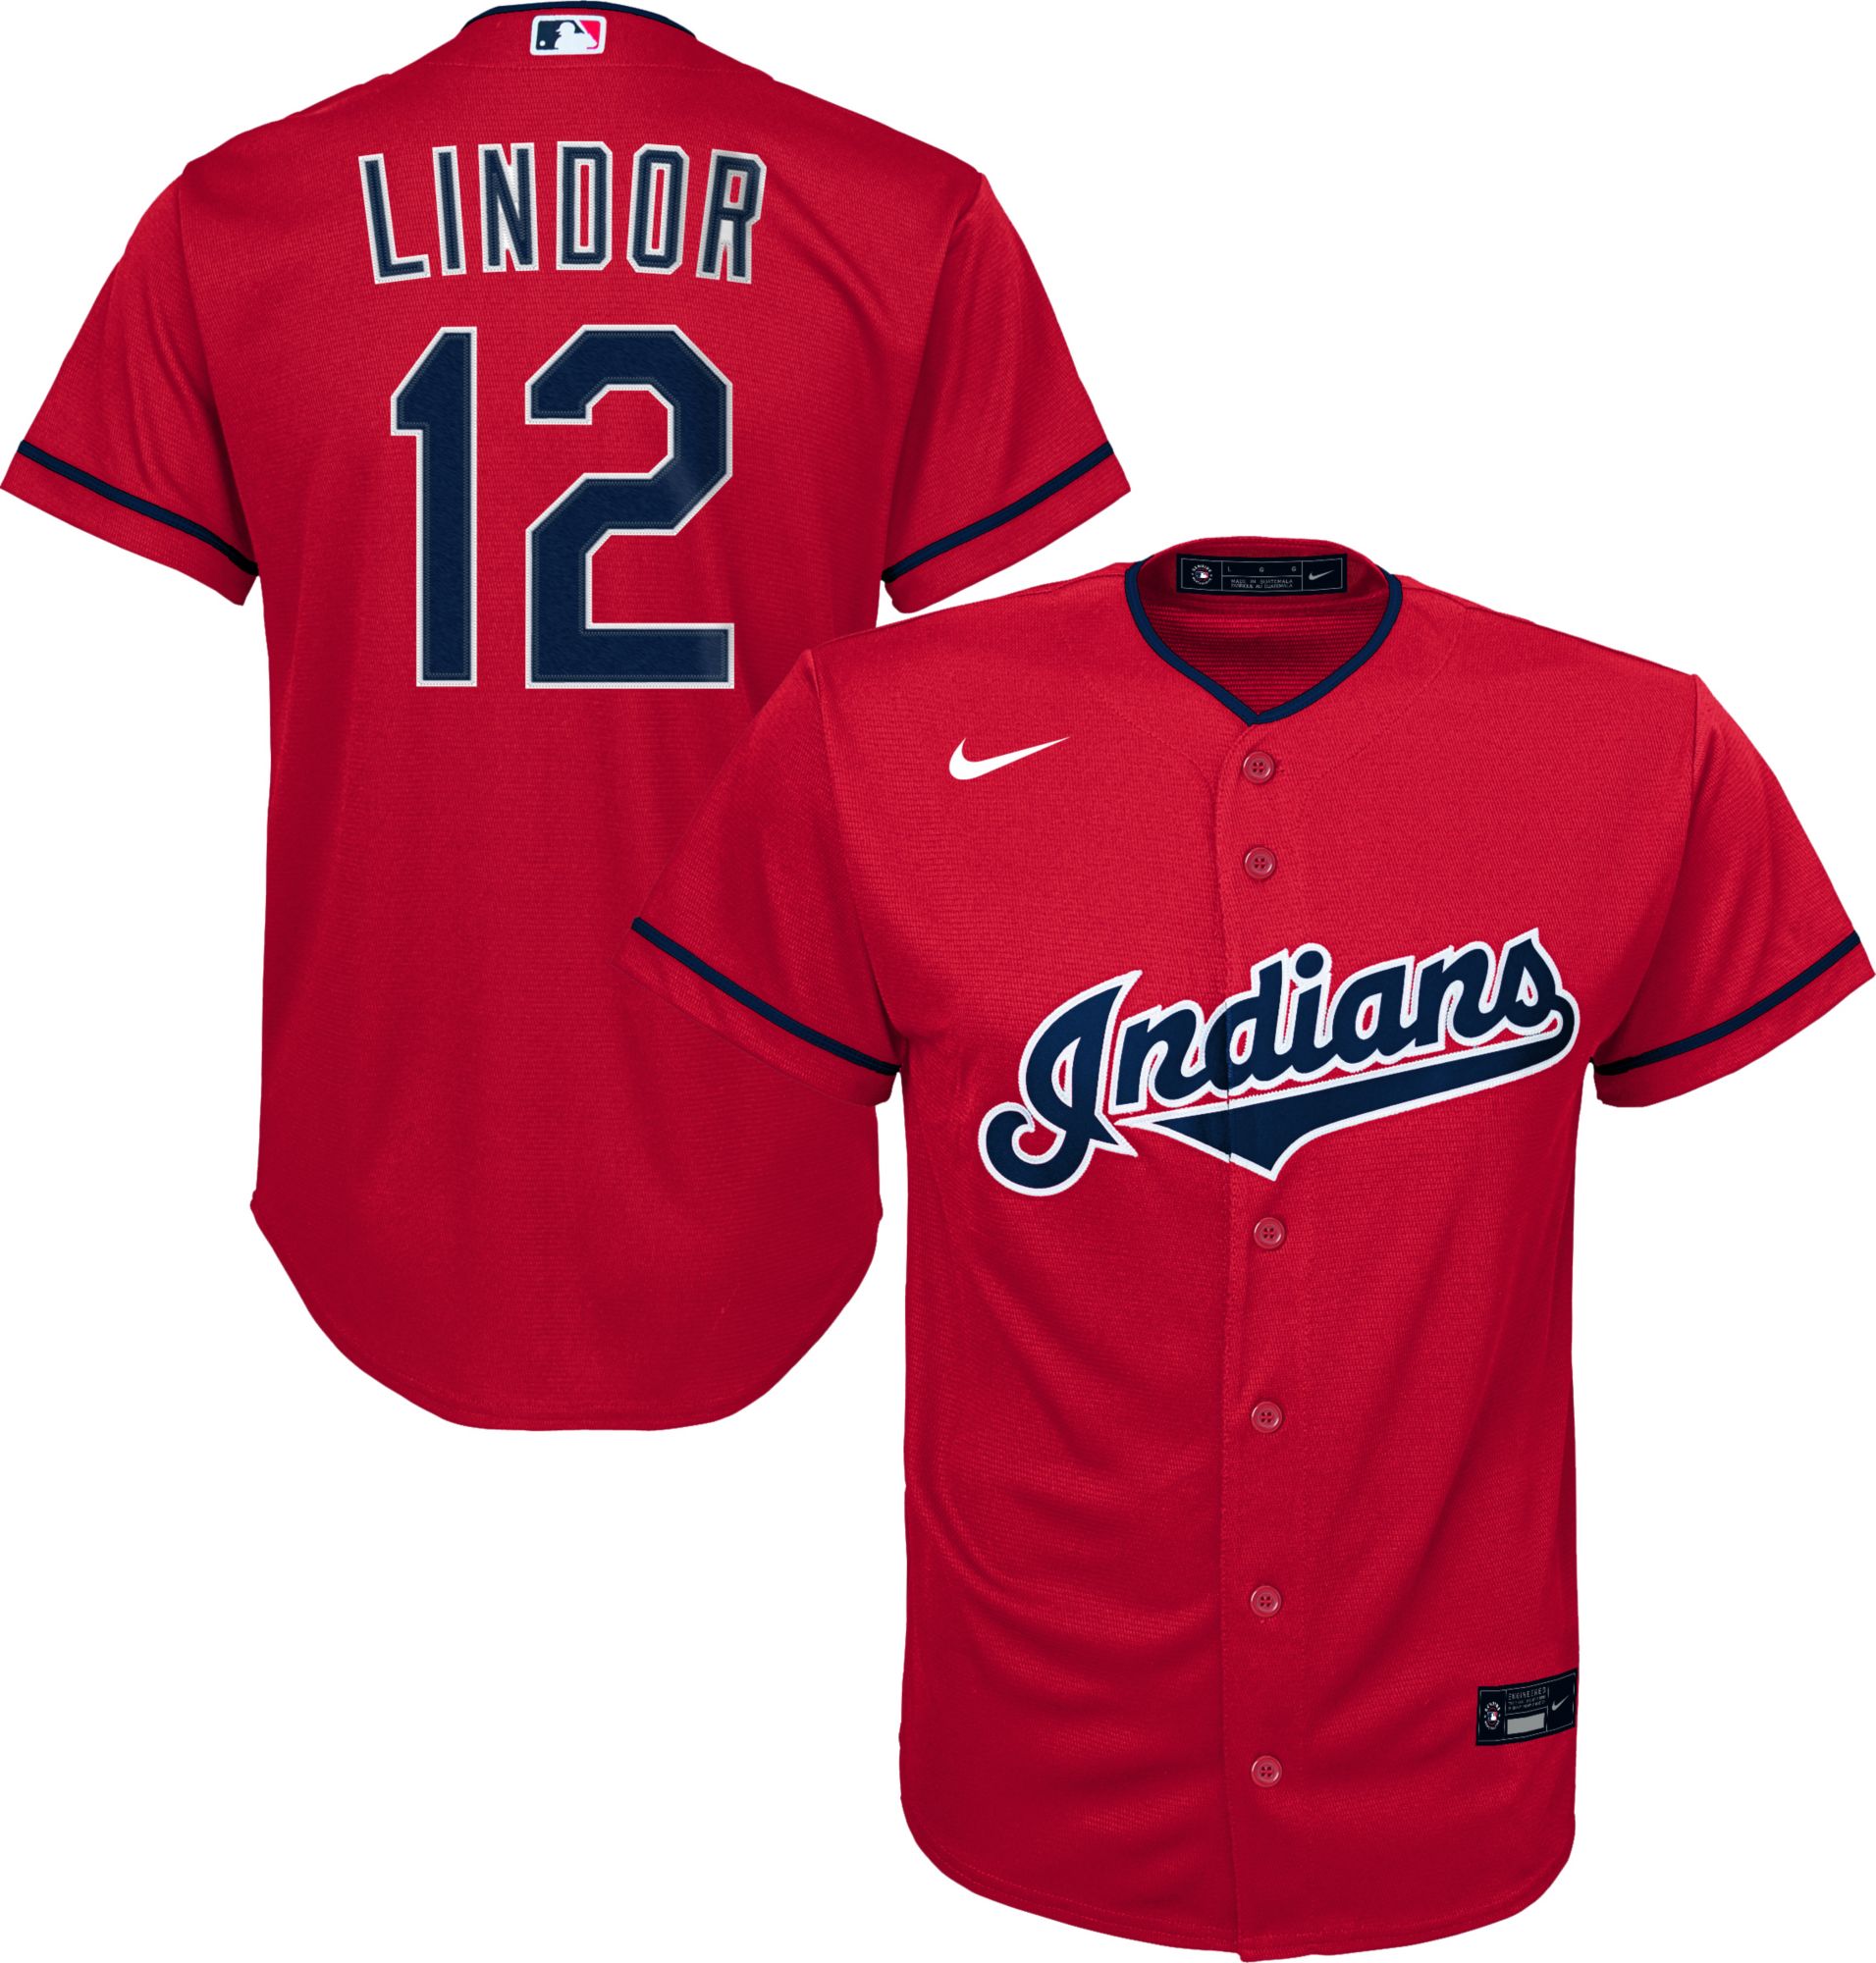 youth lindor jersey